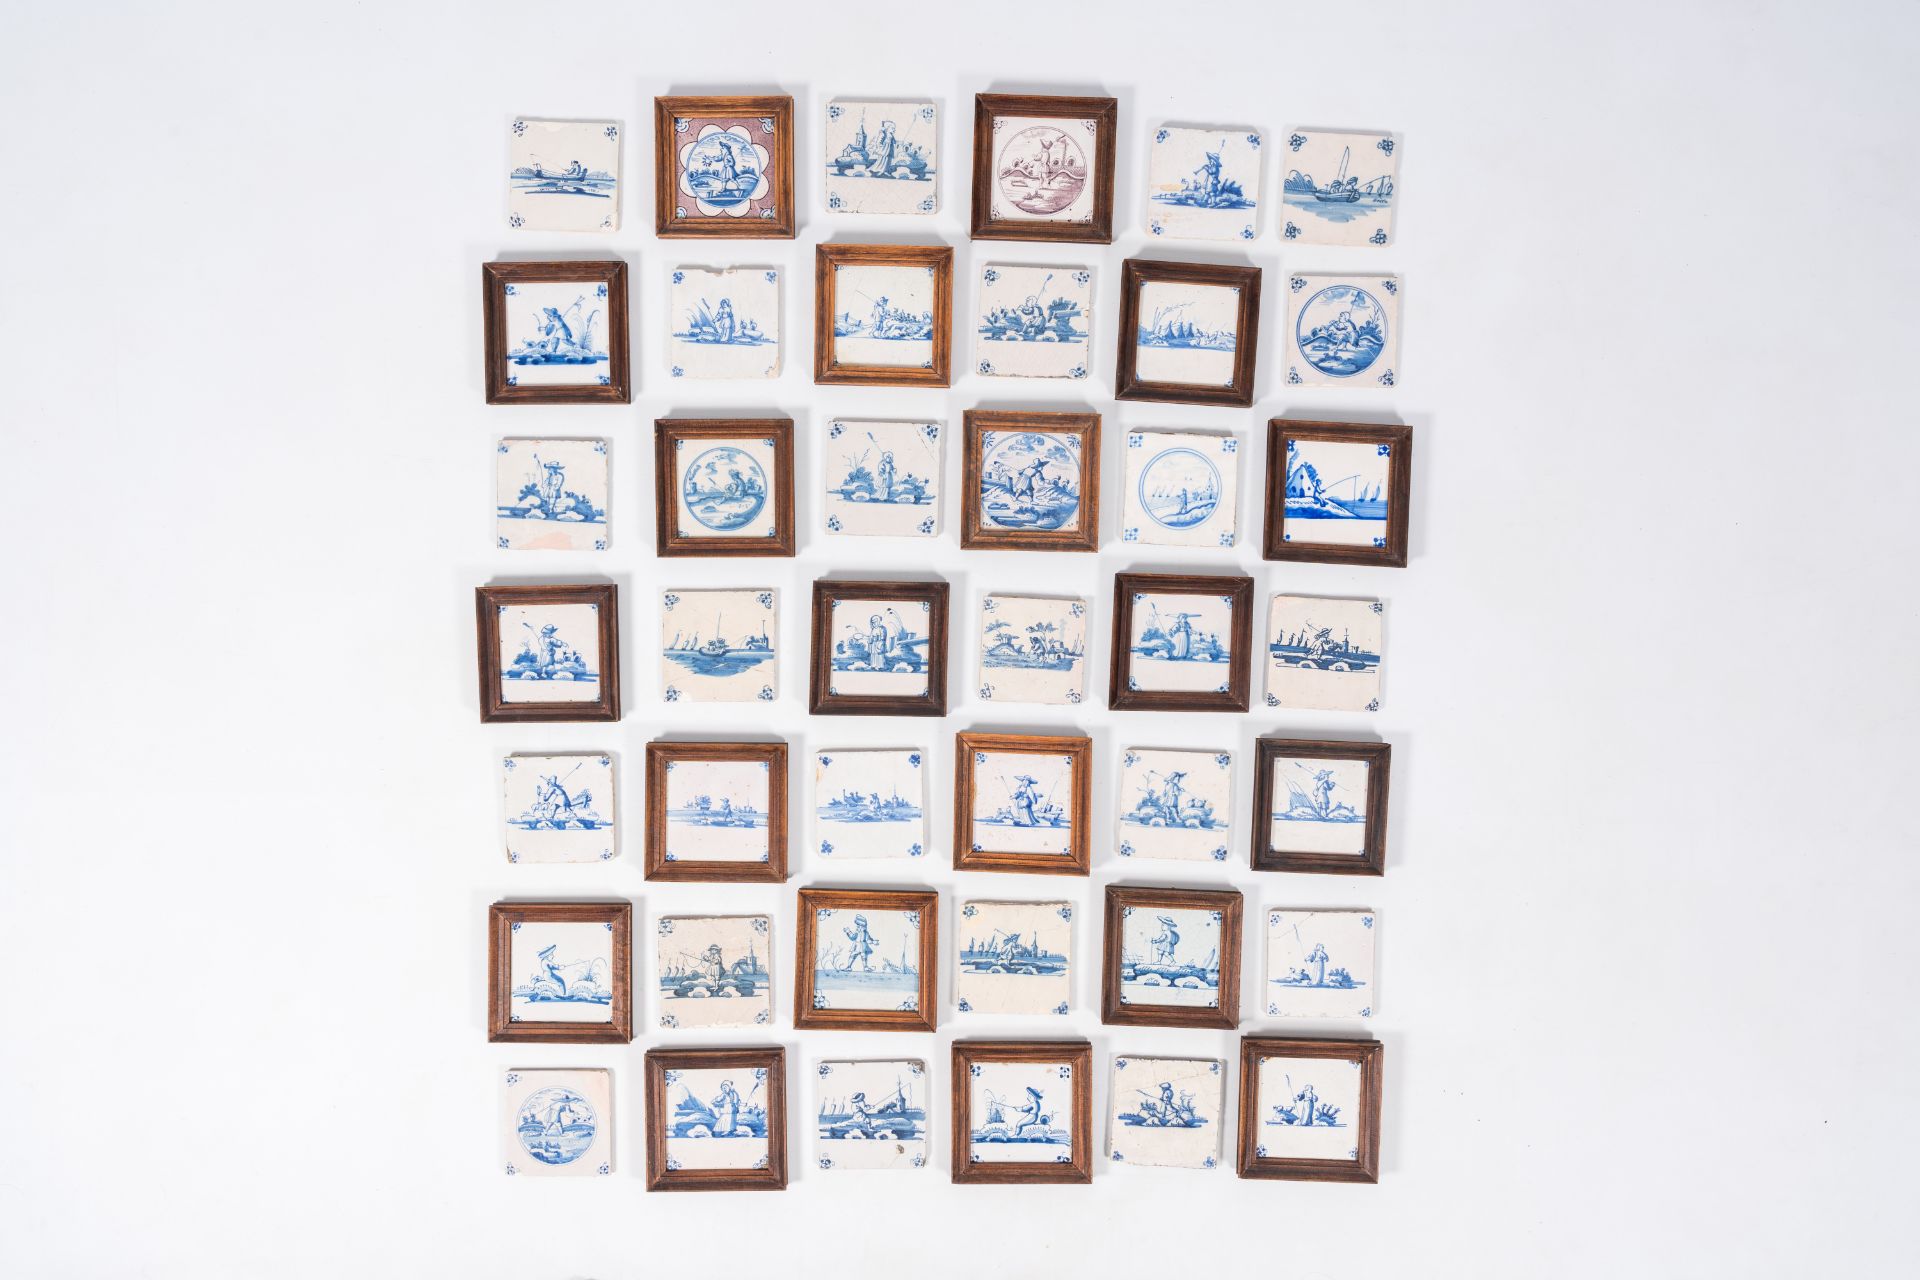 42 blue and white Dutch Delft tiles with mainly shepherds and landscapes, 18th/19th C.